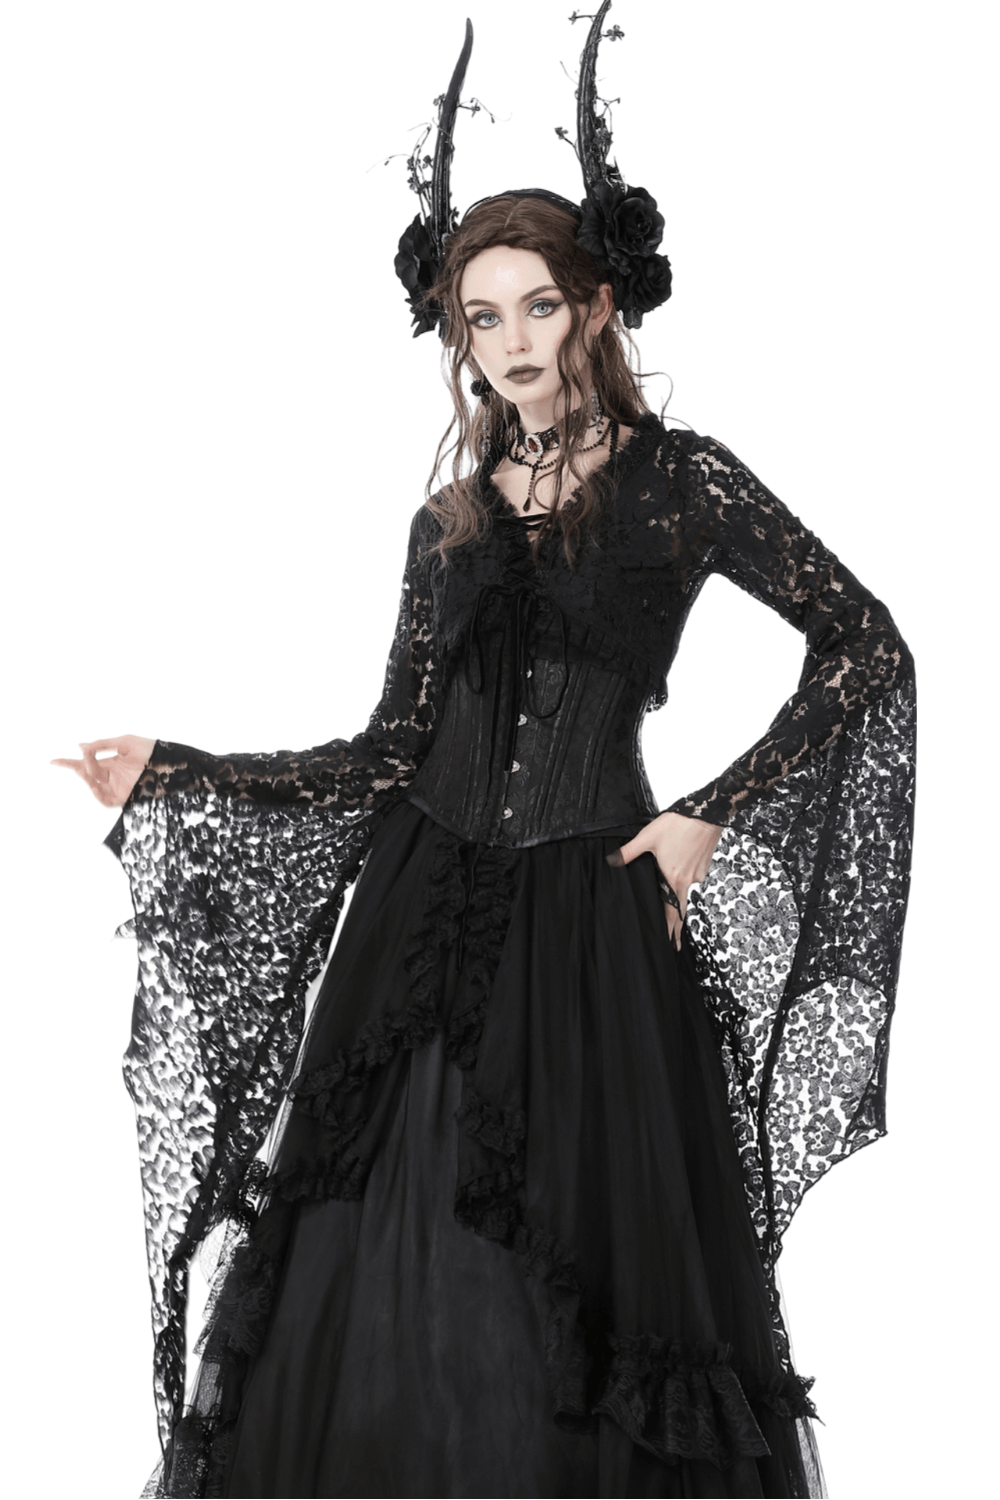 Black Lace Bolero Shrug Top with Bell Sleeves